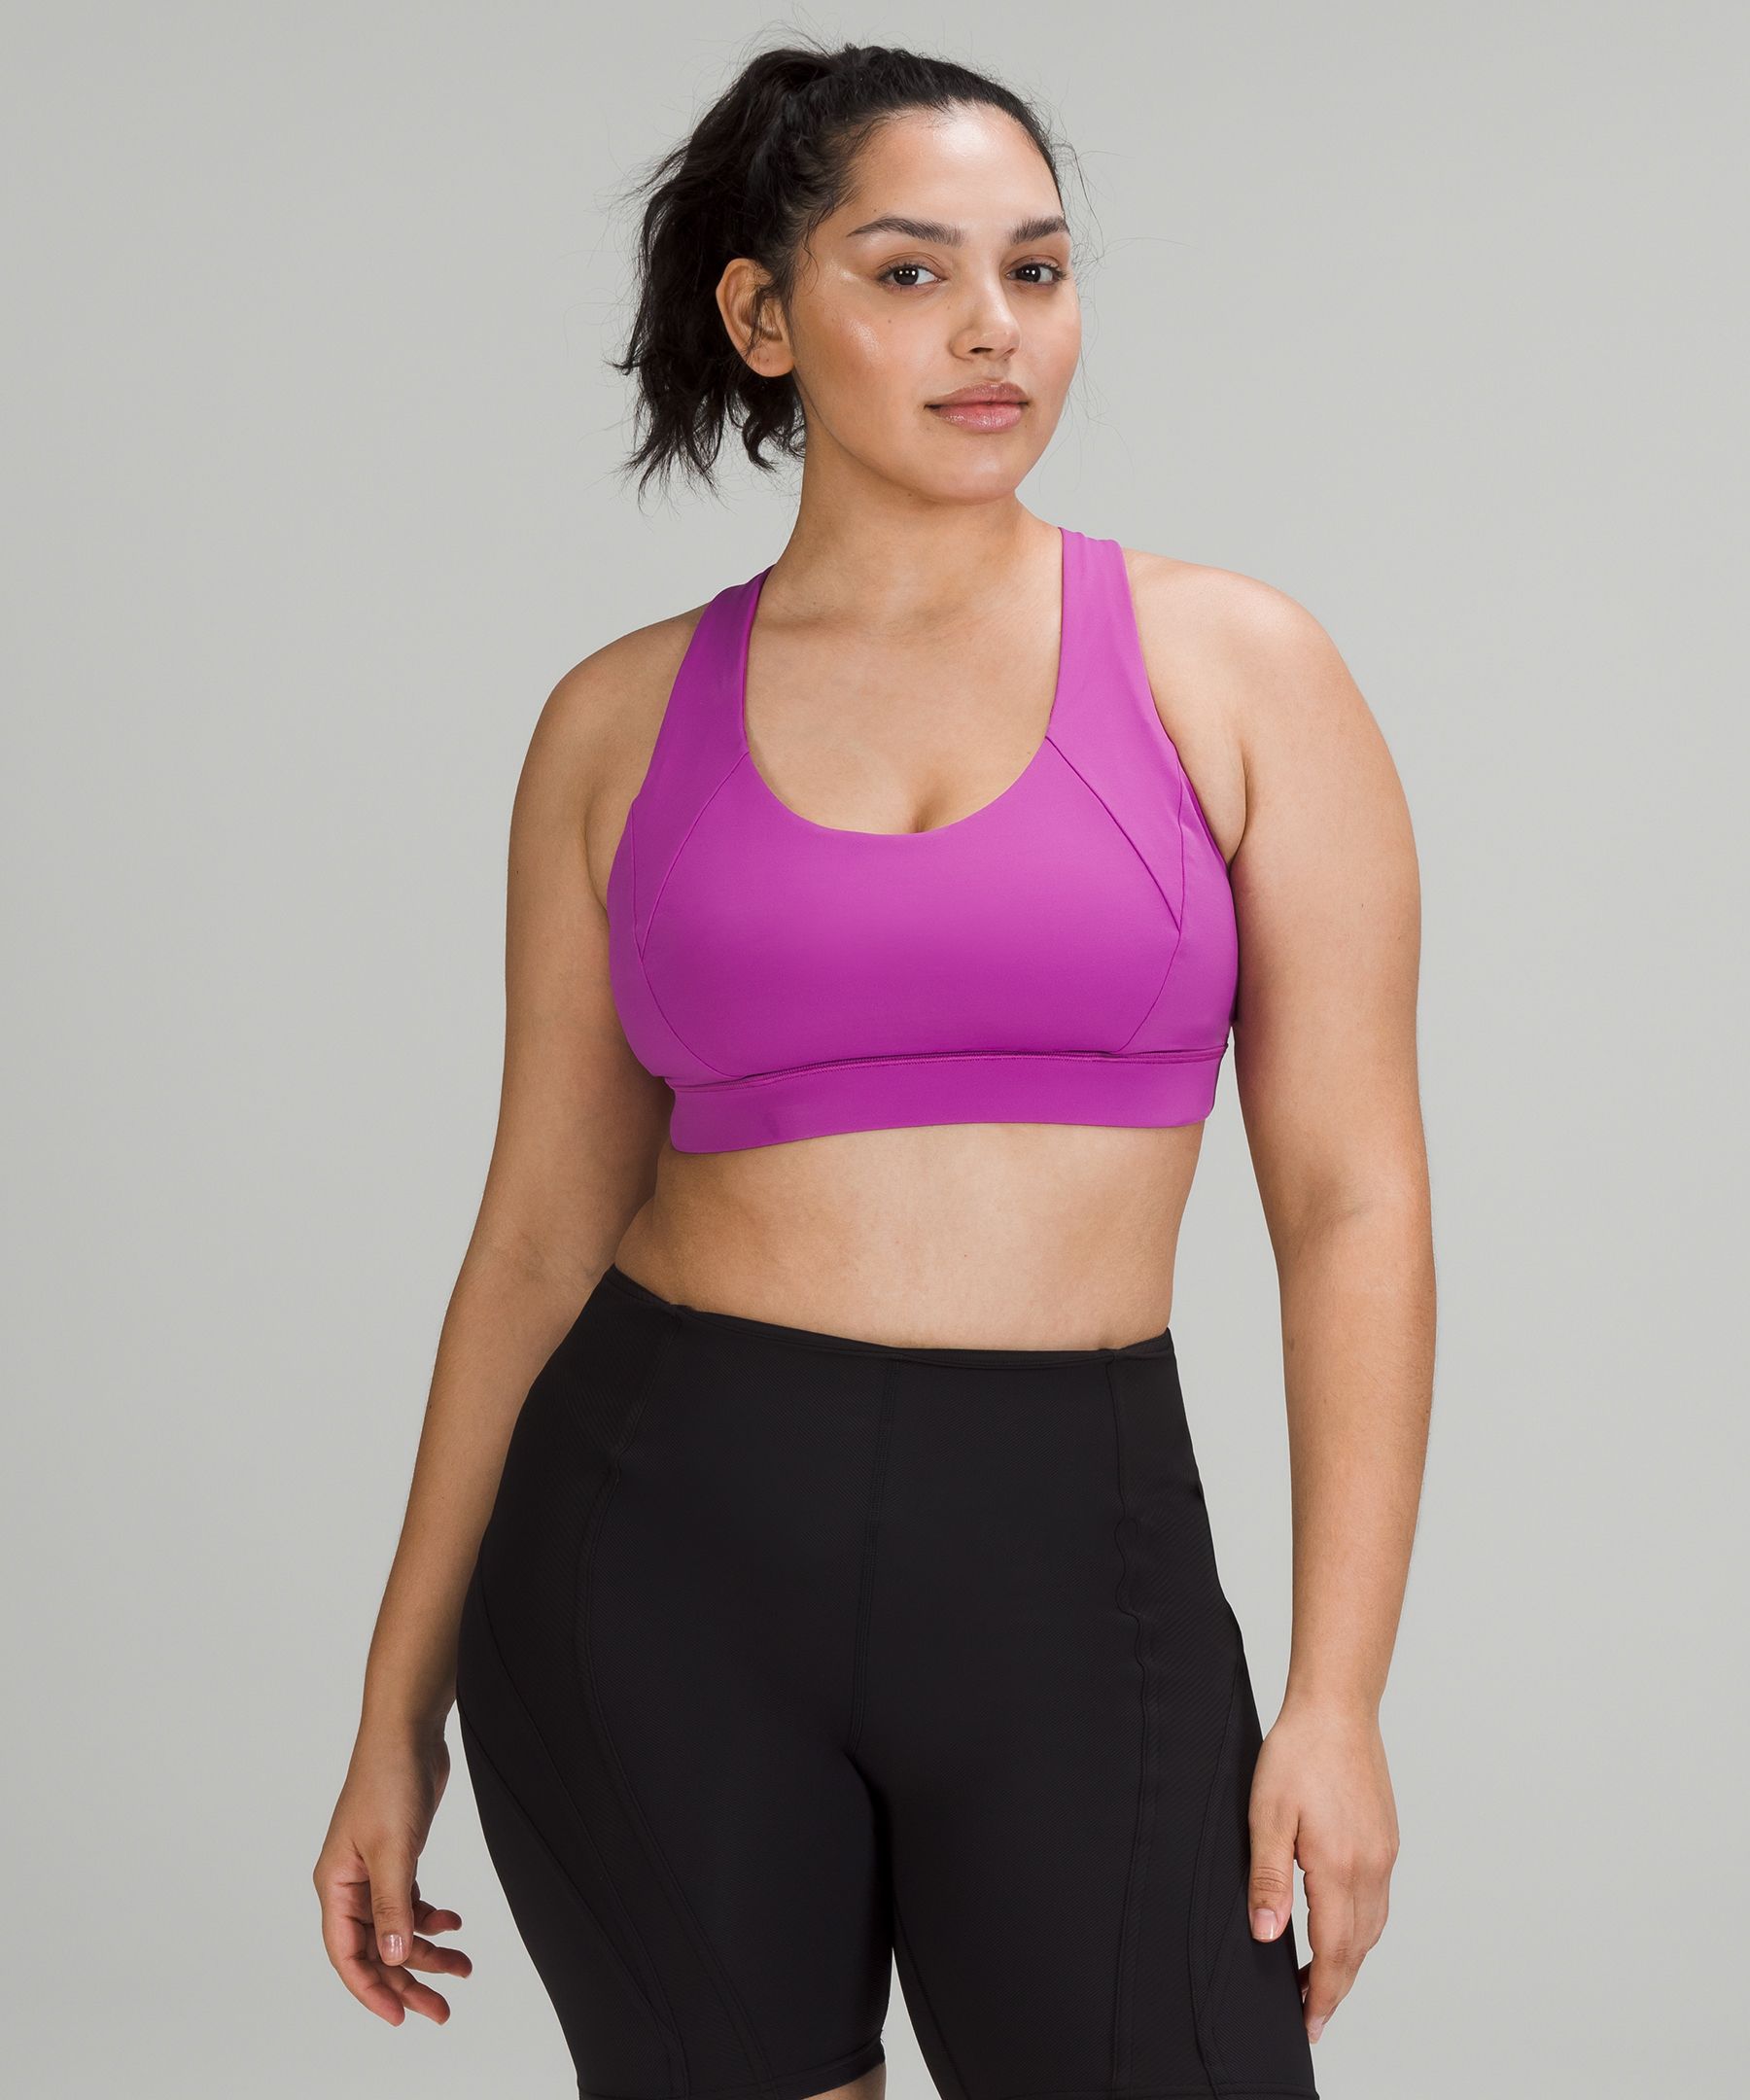 Lululemon Free To Be Elevated Bra Light Support, Dd/ddd(e) Cup